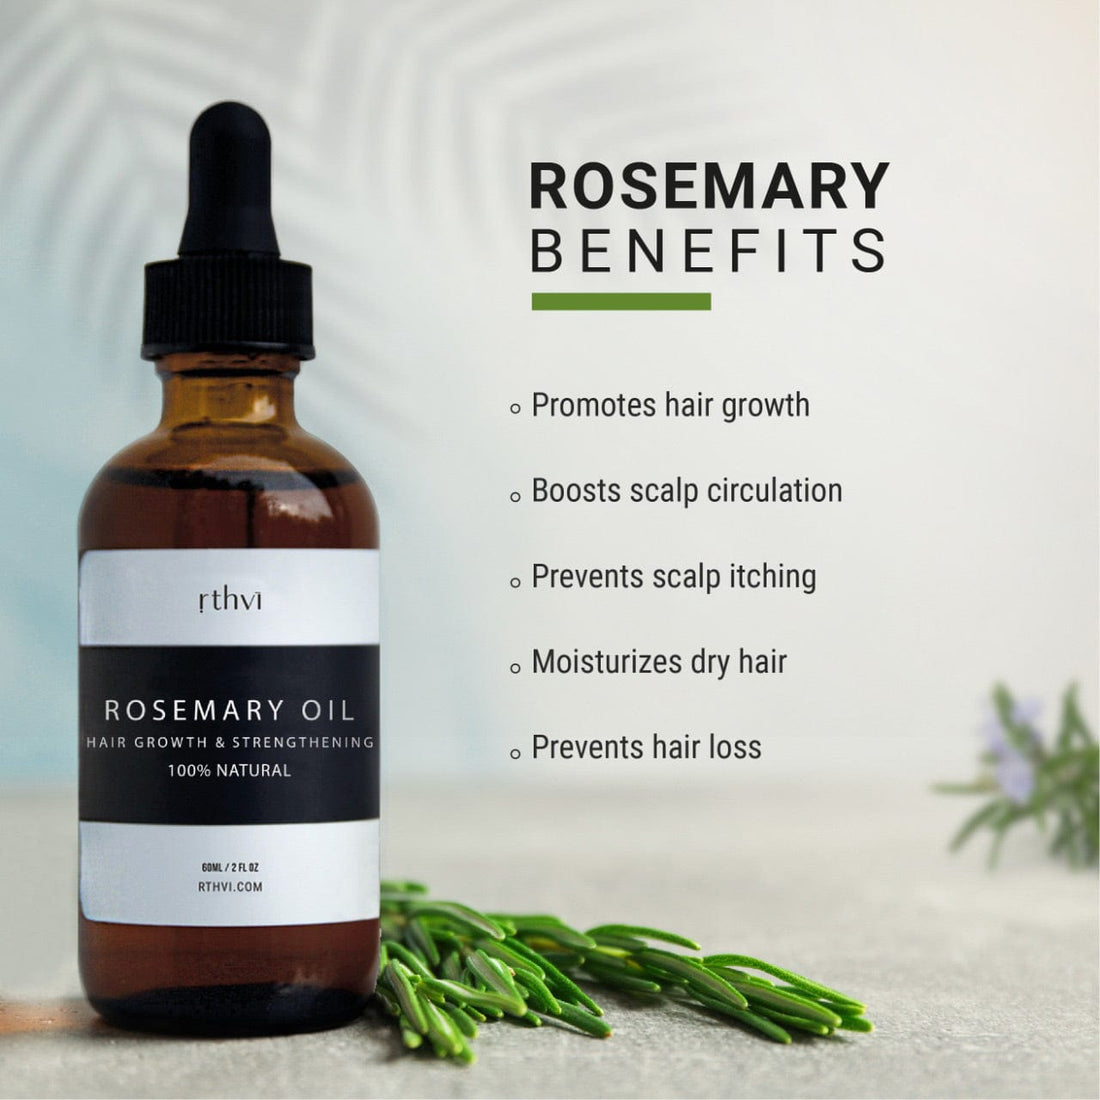 Rosemary essential oil, rosemary oil for hair growth and skin care, organic pure  rosemary oil for hair loss and dry damaged hair, nourishes the scalp and  stimulates hair growth